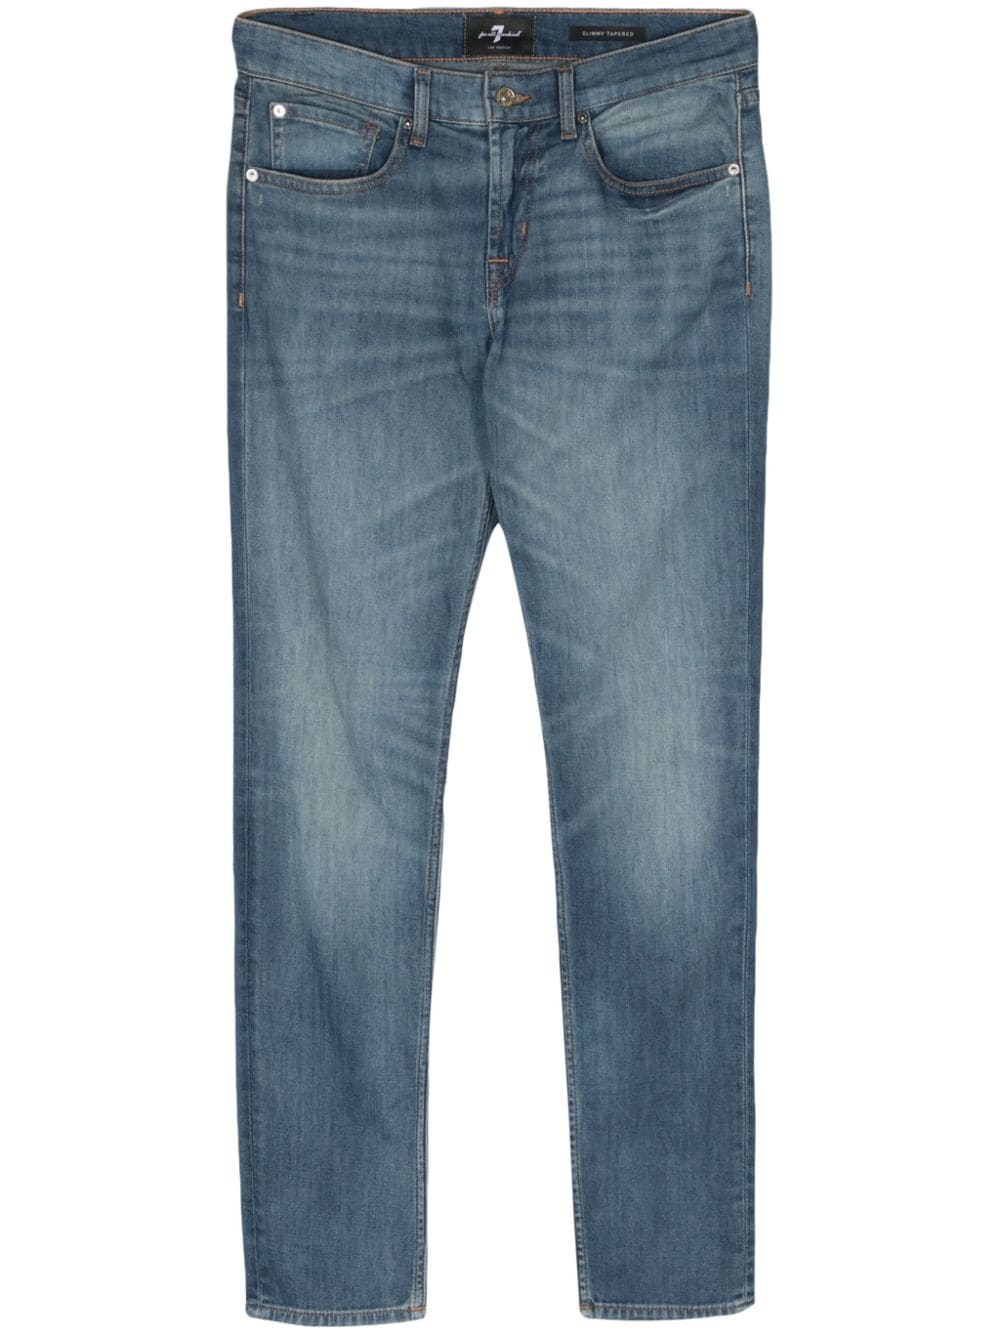 7 For All Mankind Halbhohe Slimmy Tapered-Jeans - Blau von 7 For All Mankind